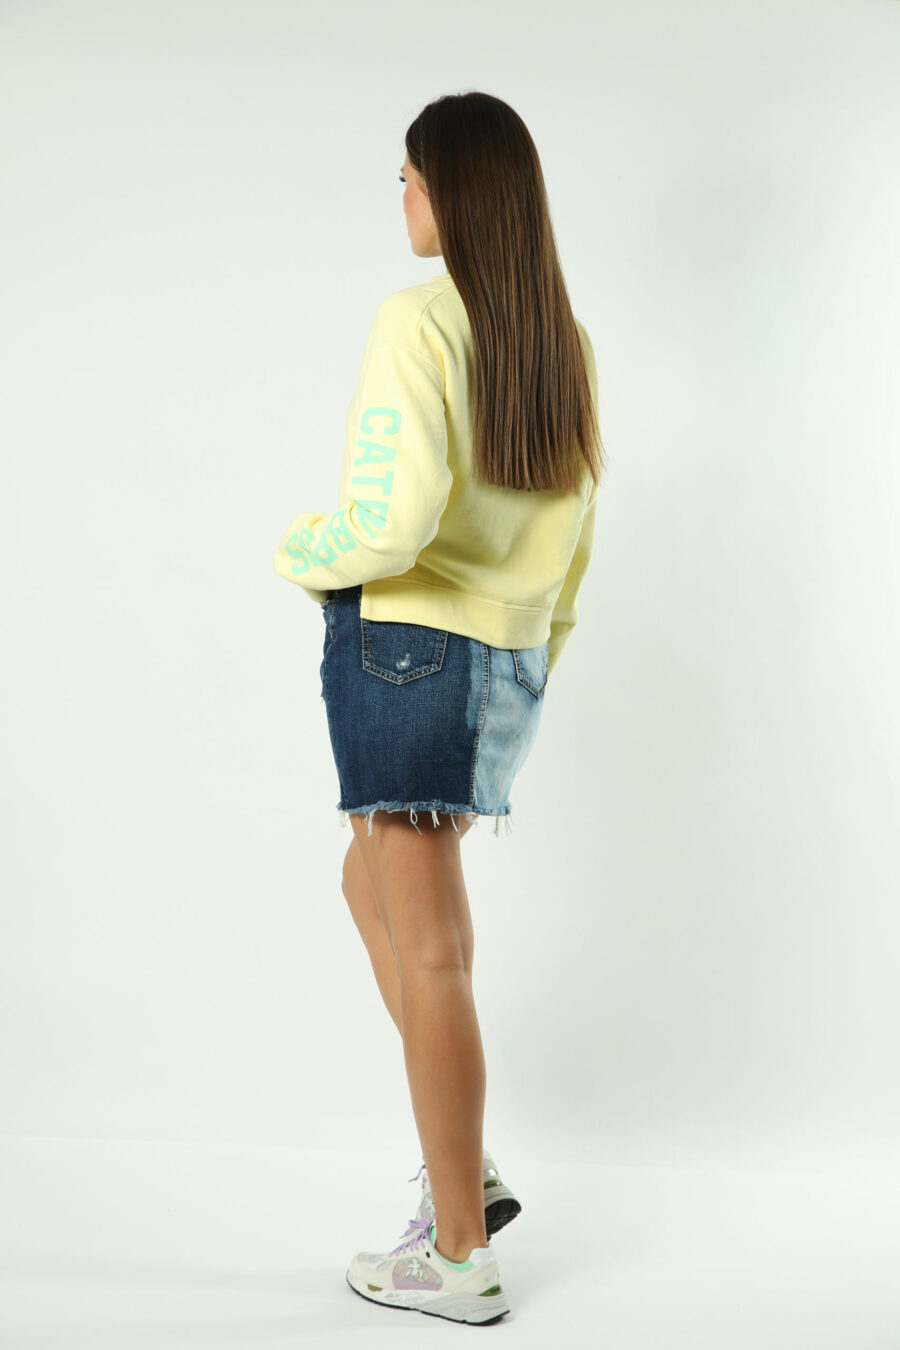 Yellow sweatshirt with green maxilogo and text on sleeves - 8052134554463 5